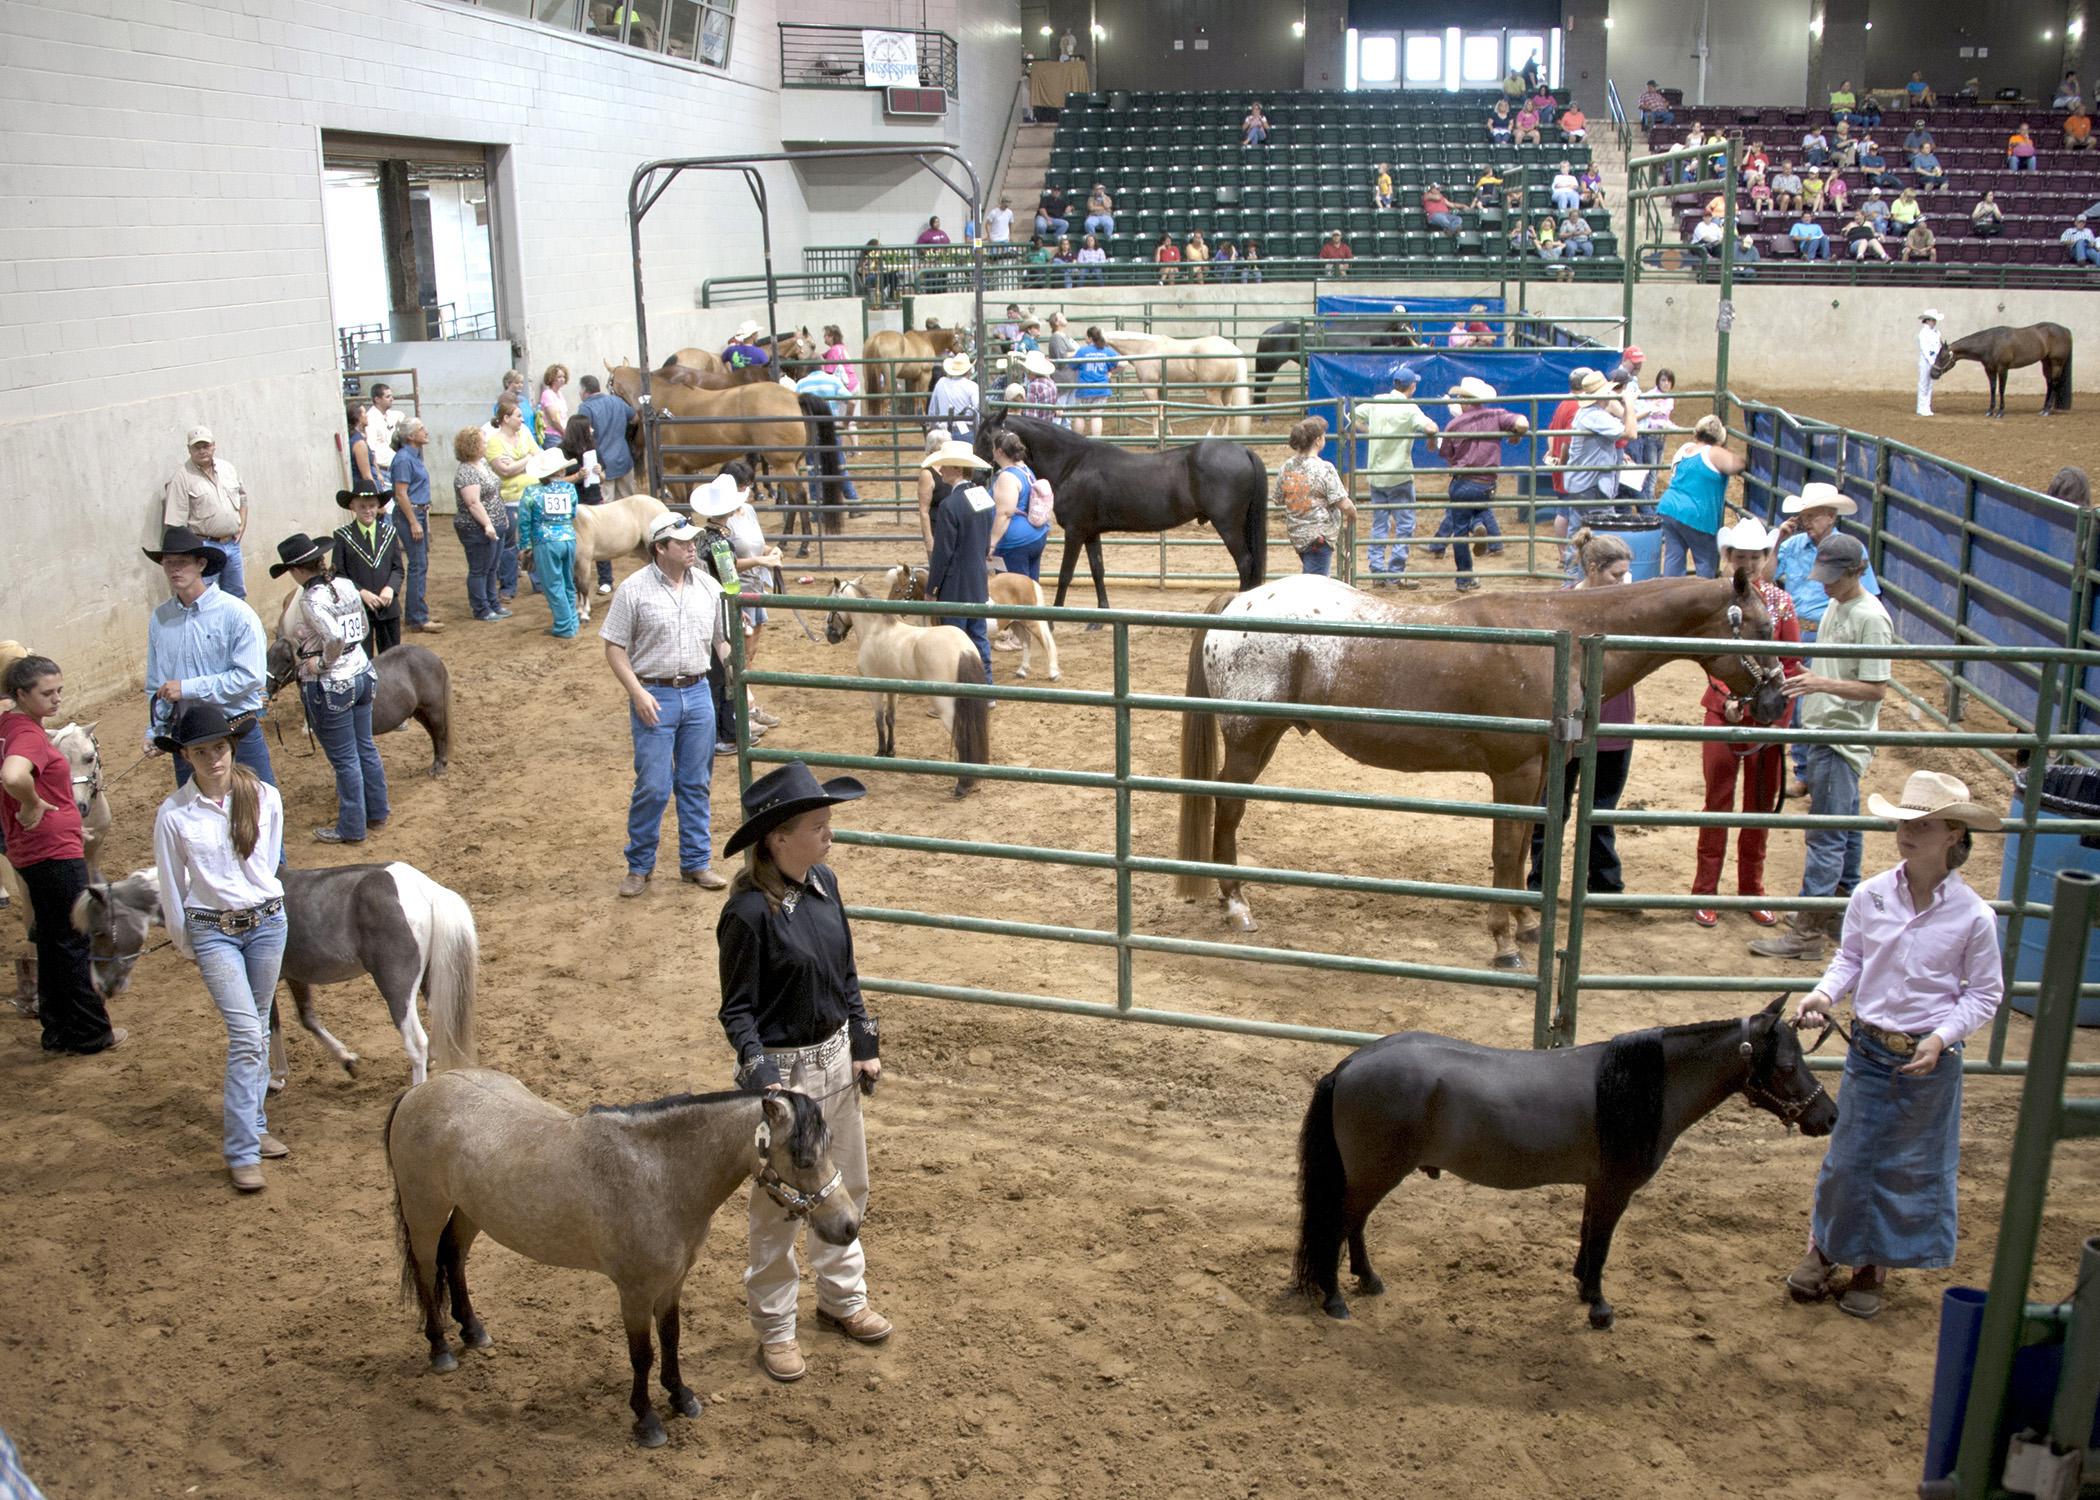 Mississippi junior and senior 4-H'ers prepare to enter the ring for the selection of grand and reserve grand champion pony mares, registered American quarter horse mares, grade western mares, and registered paint mares on June 28 during the 2013 4-H Horse Championship at the Mississippi State Fairgrounds in Jackson. (Photo by MSU Ag Communications/Kat Lawrence)